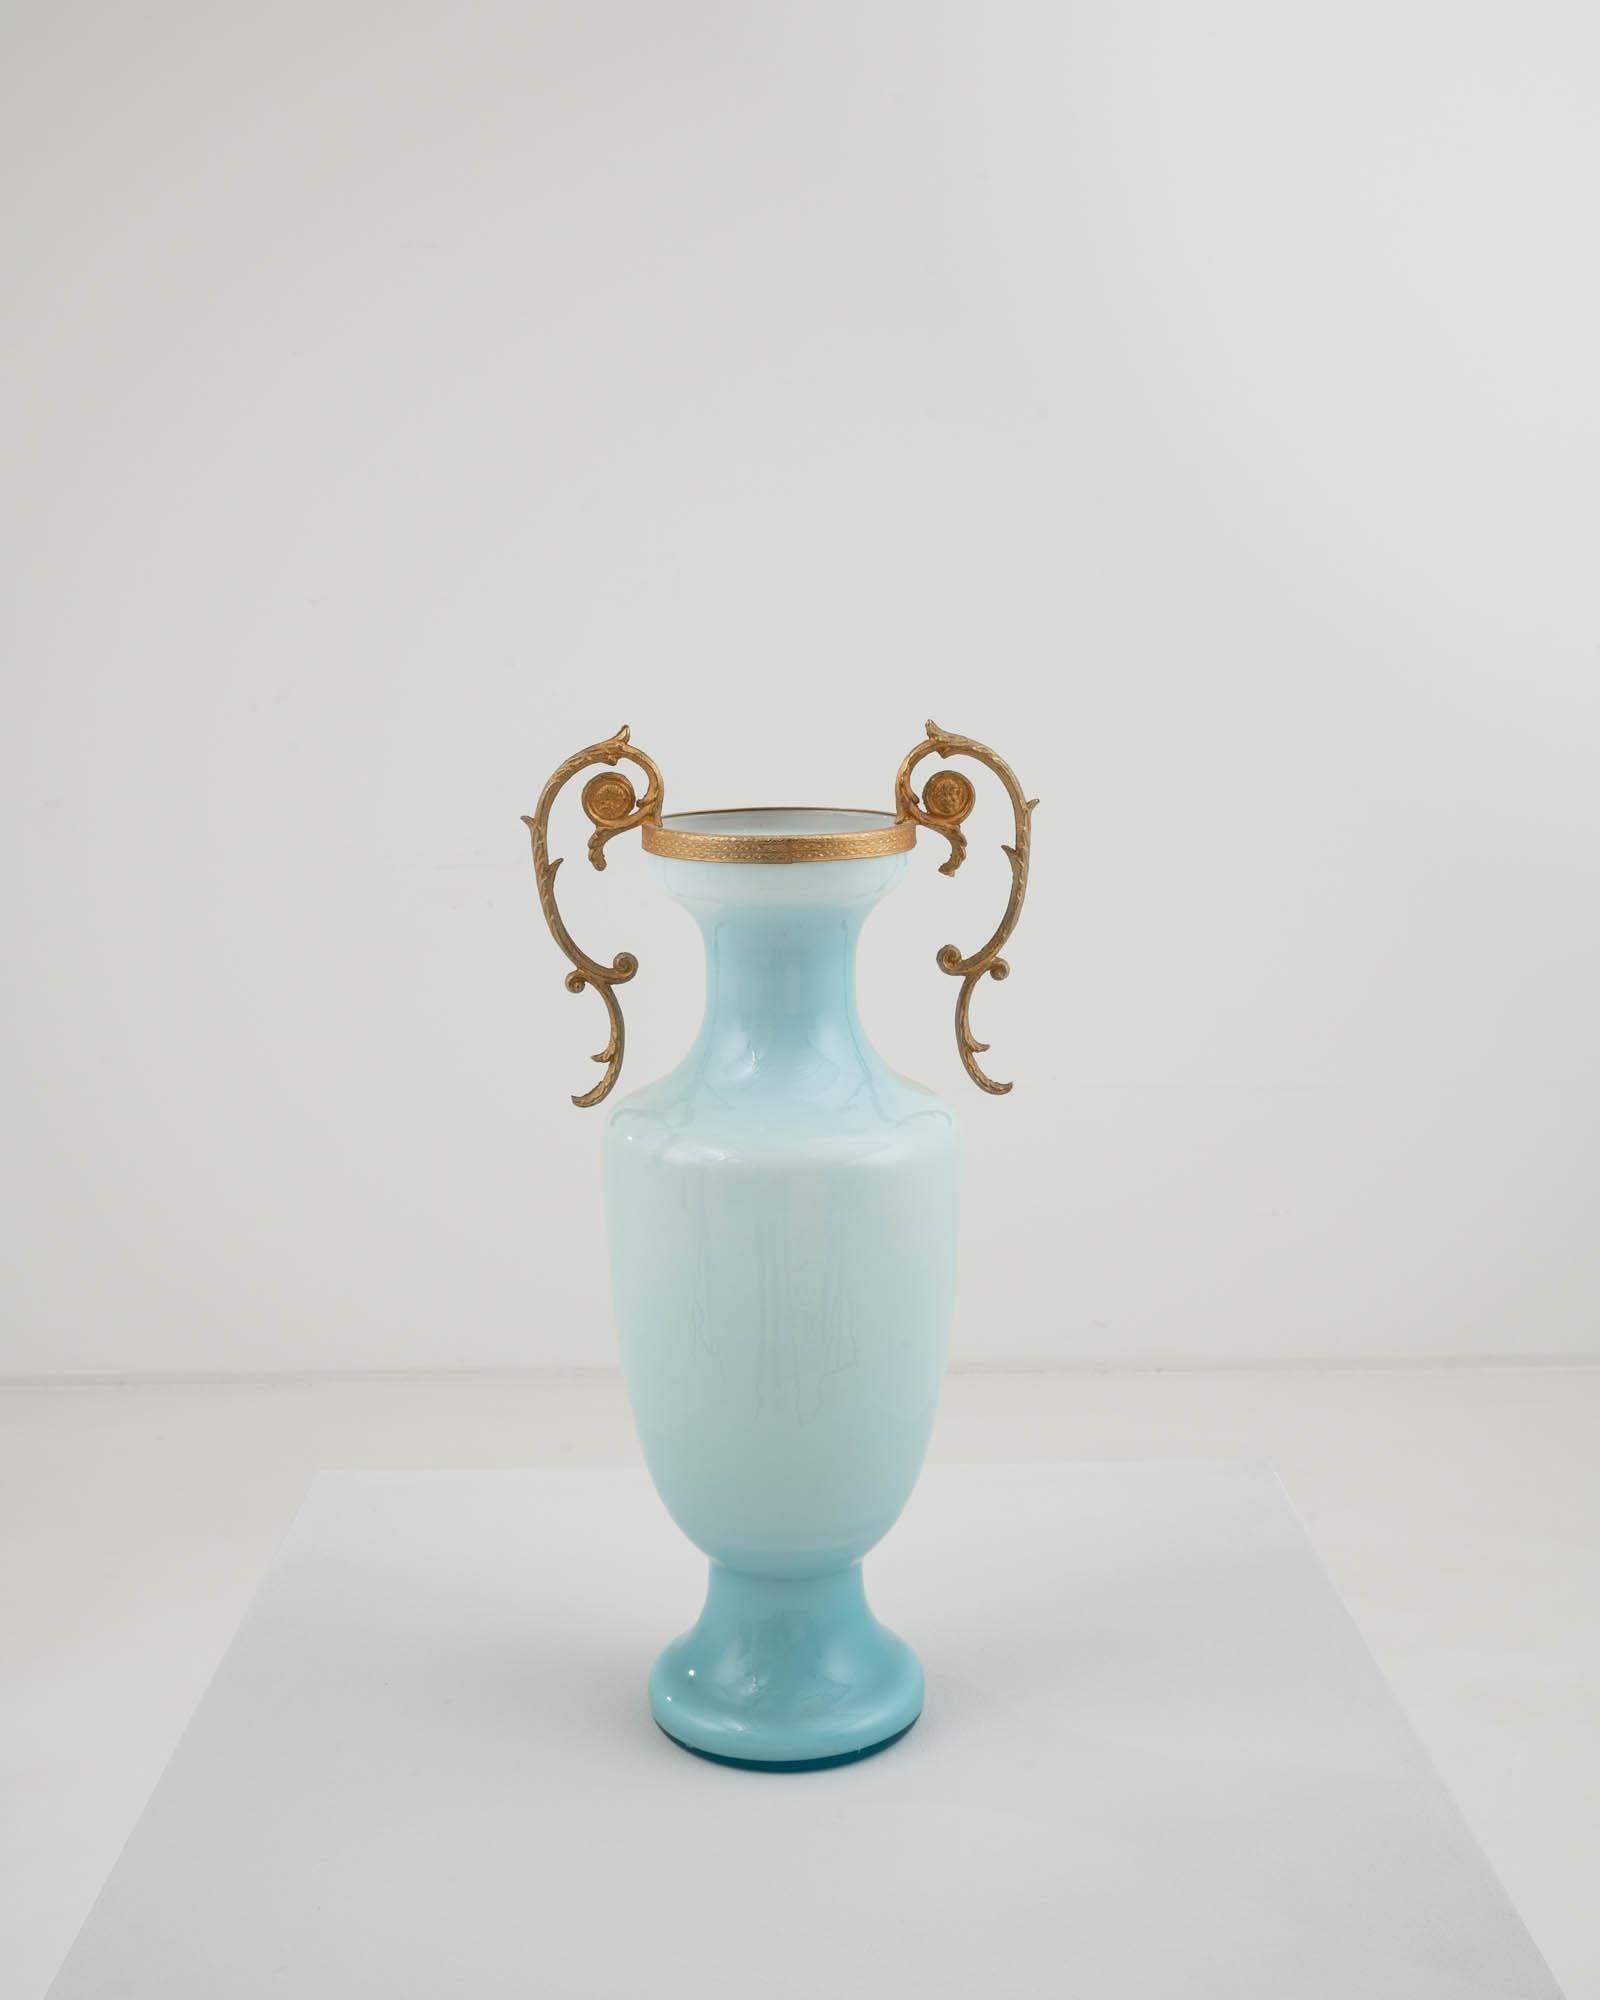 Handcrafted in Italy in the 20th century, this vintage vase showcases a unique tone of glass, smoothly transitioning from light, almost white hues to a deep pastel blue. This gradient accentuates its refined silhouette and interplays beautifully